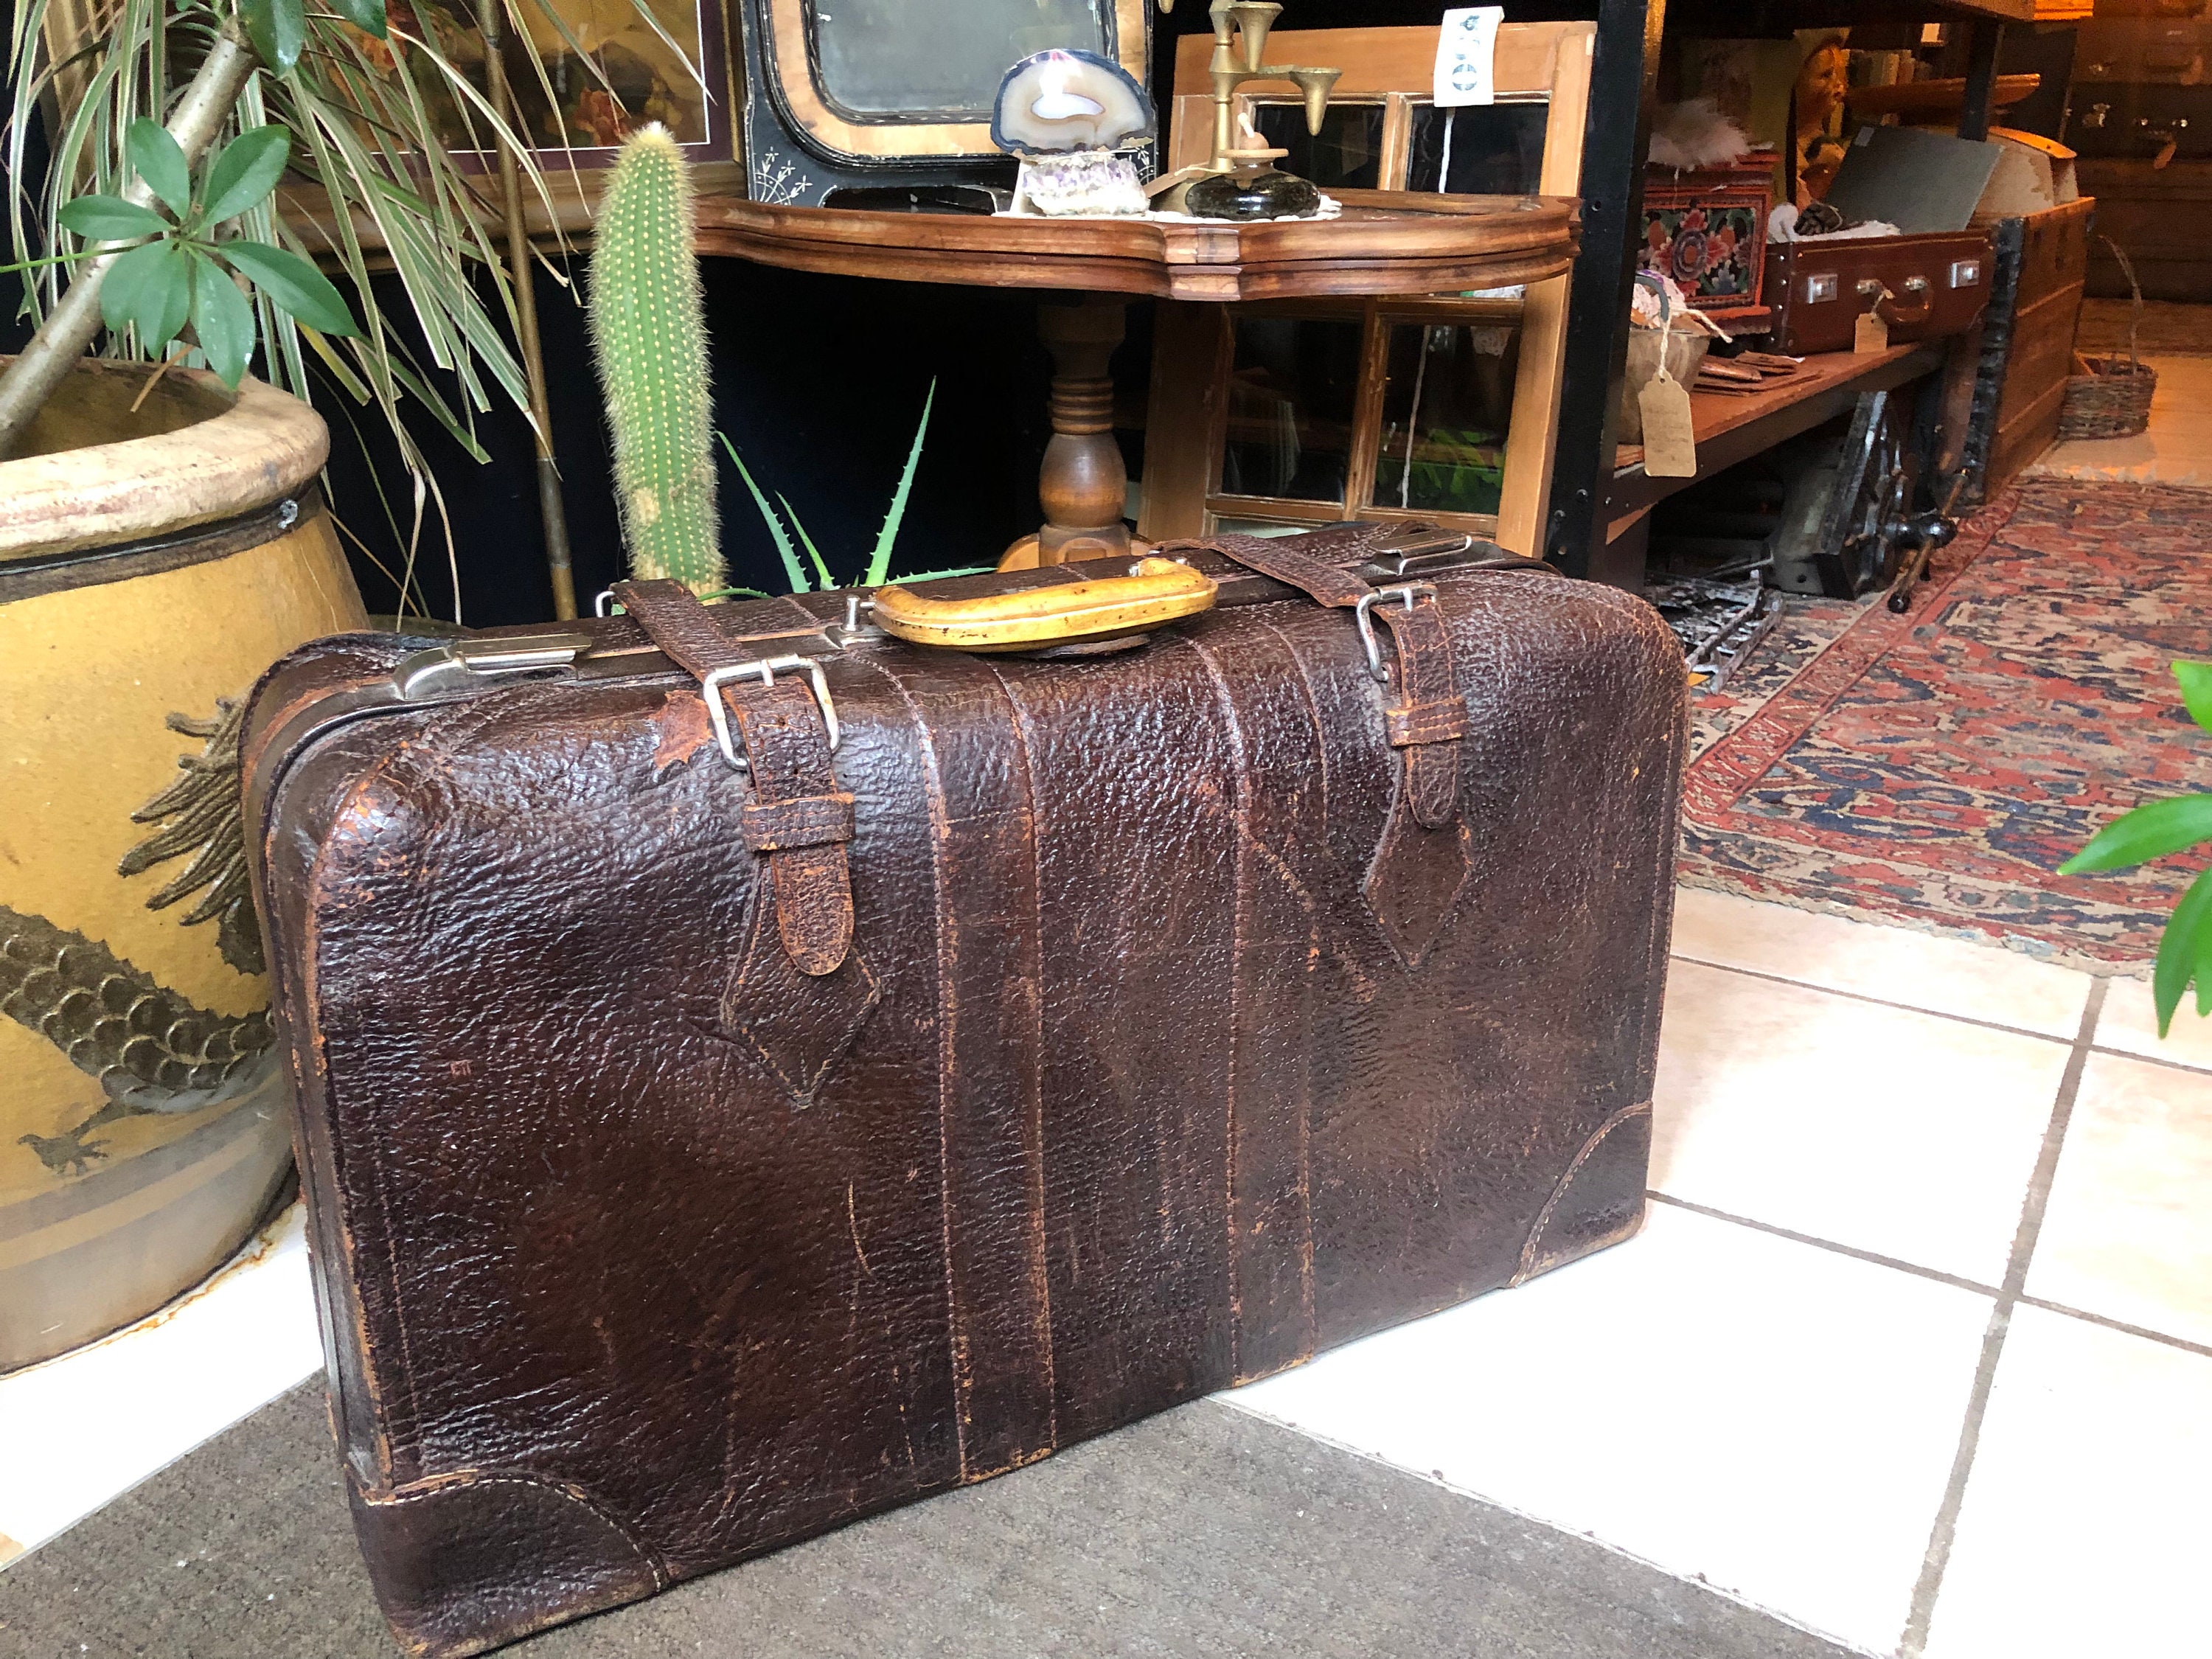 Vintage 1920s Leather Covered Suitcase Belber Rustic Shabby 